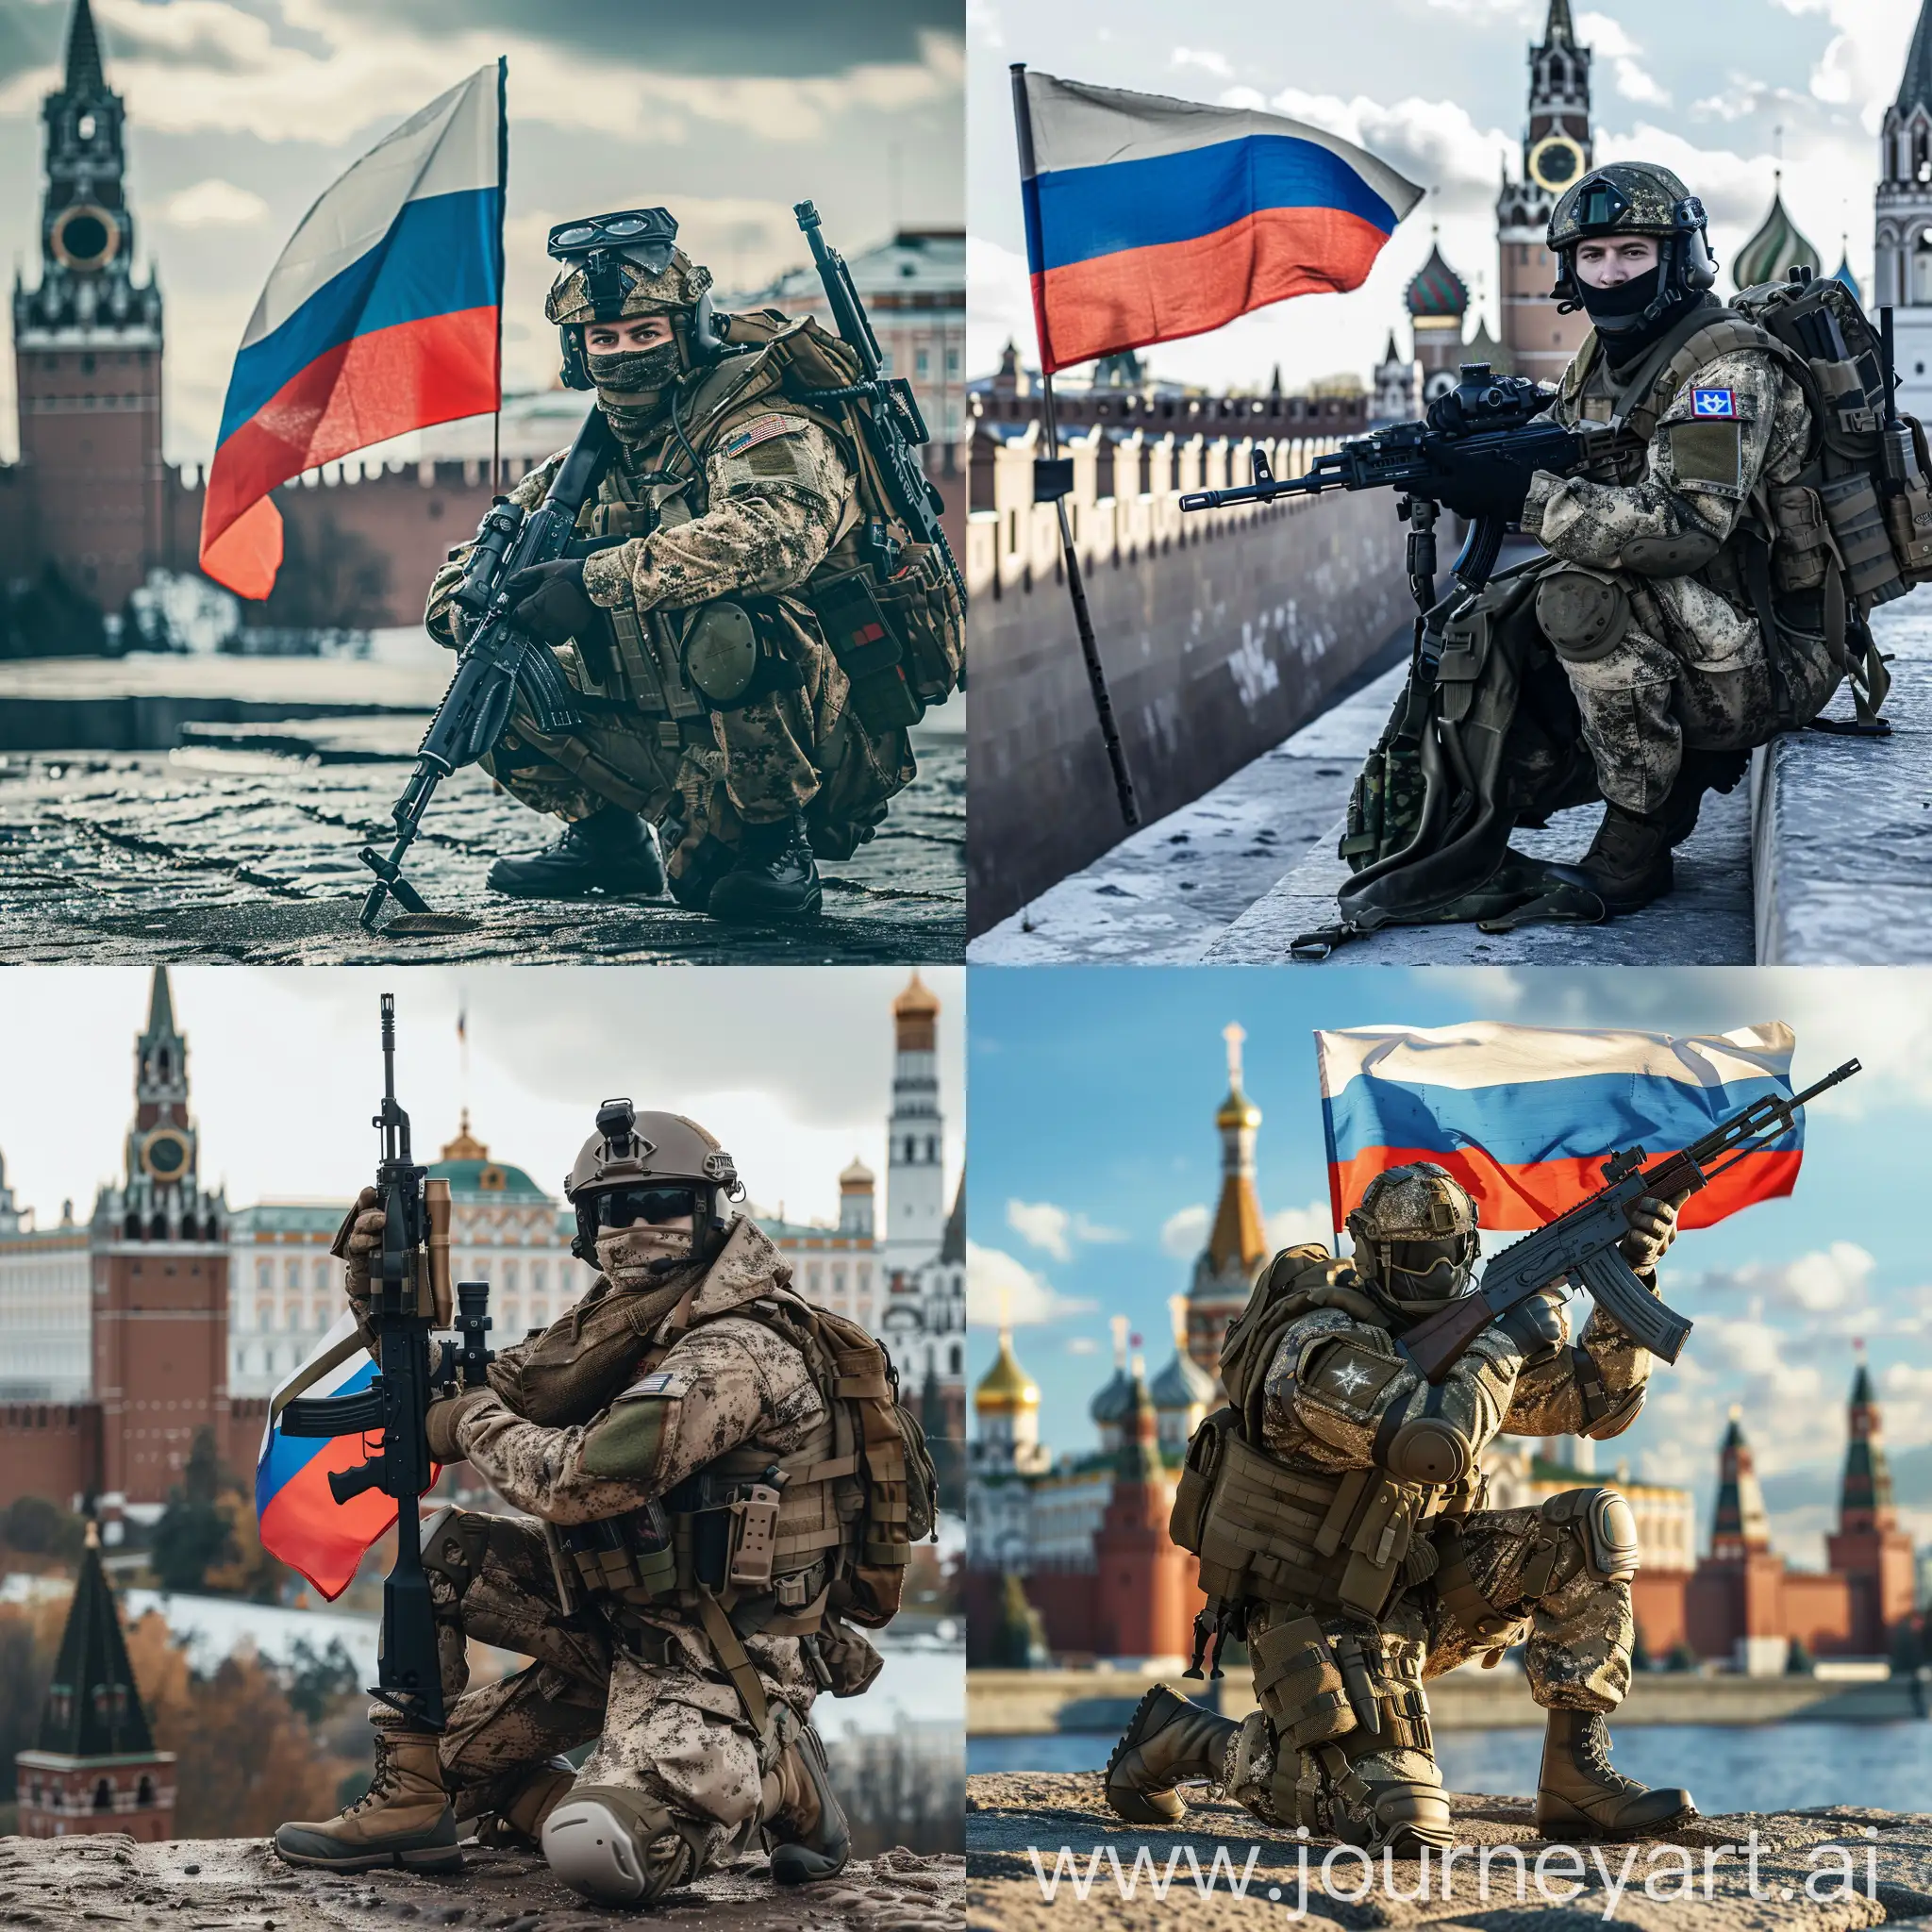 A fighter of the special operations forces with a Kalashnikov assault rifle, with the flag of Russia posing against the background of the Kremlin